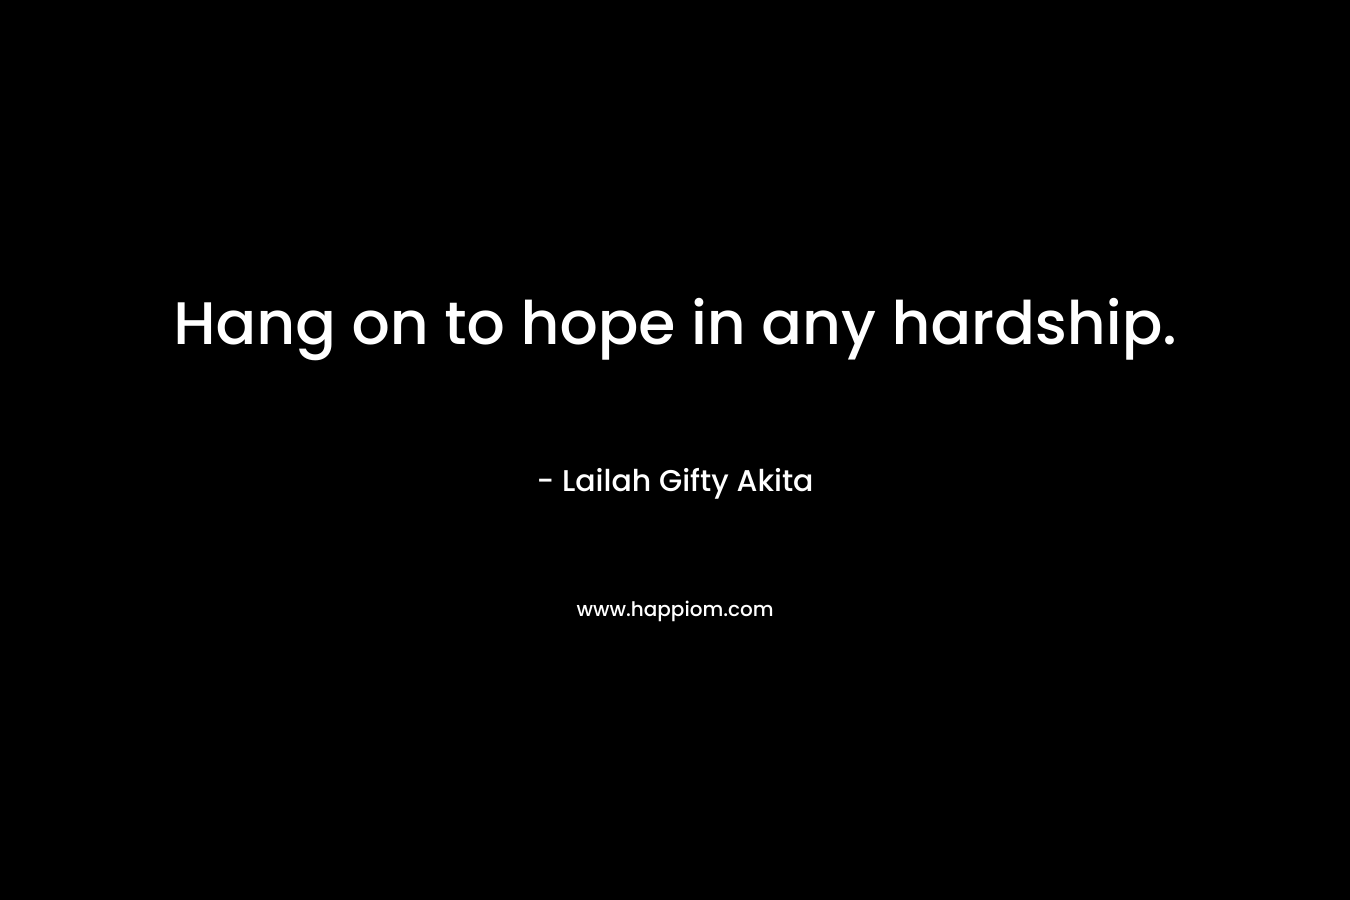 Hang on to hope in any hardship. – Lailah Gifty Akita